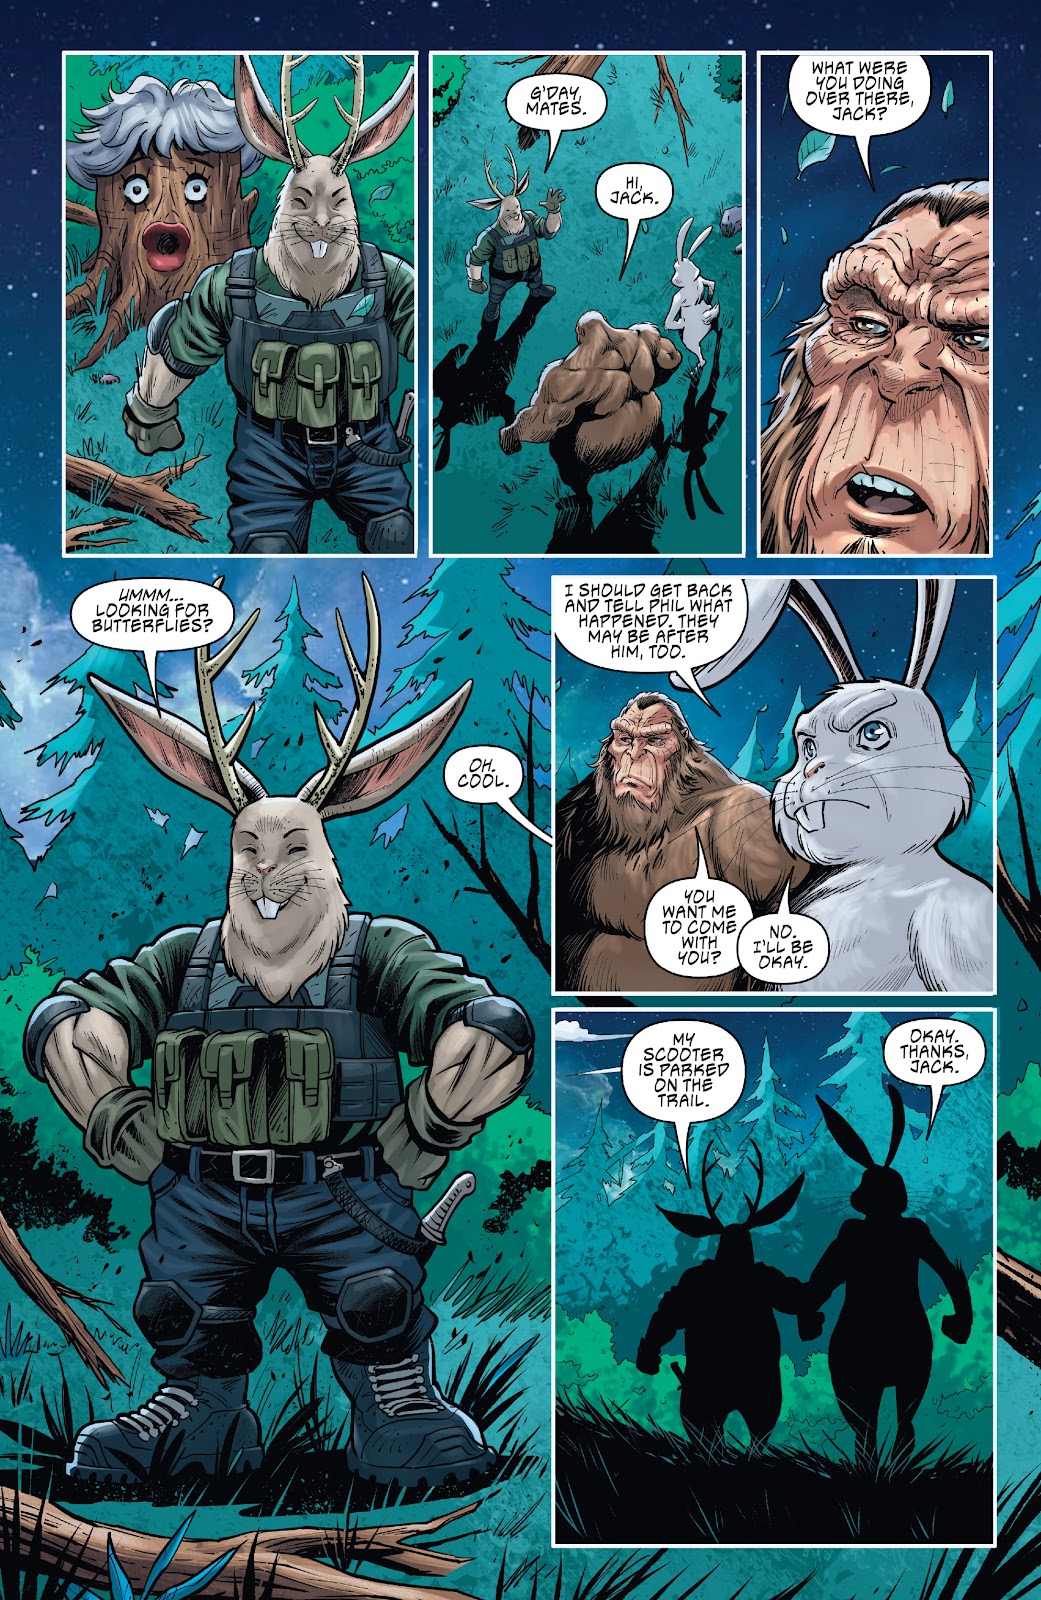 Man Goat & the Bunnyman: Green Eggs & Blam issue 1 - Page 19